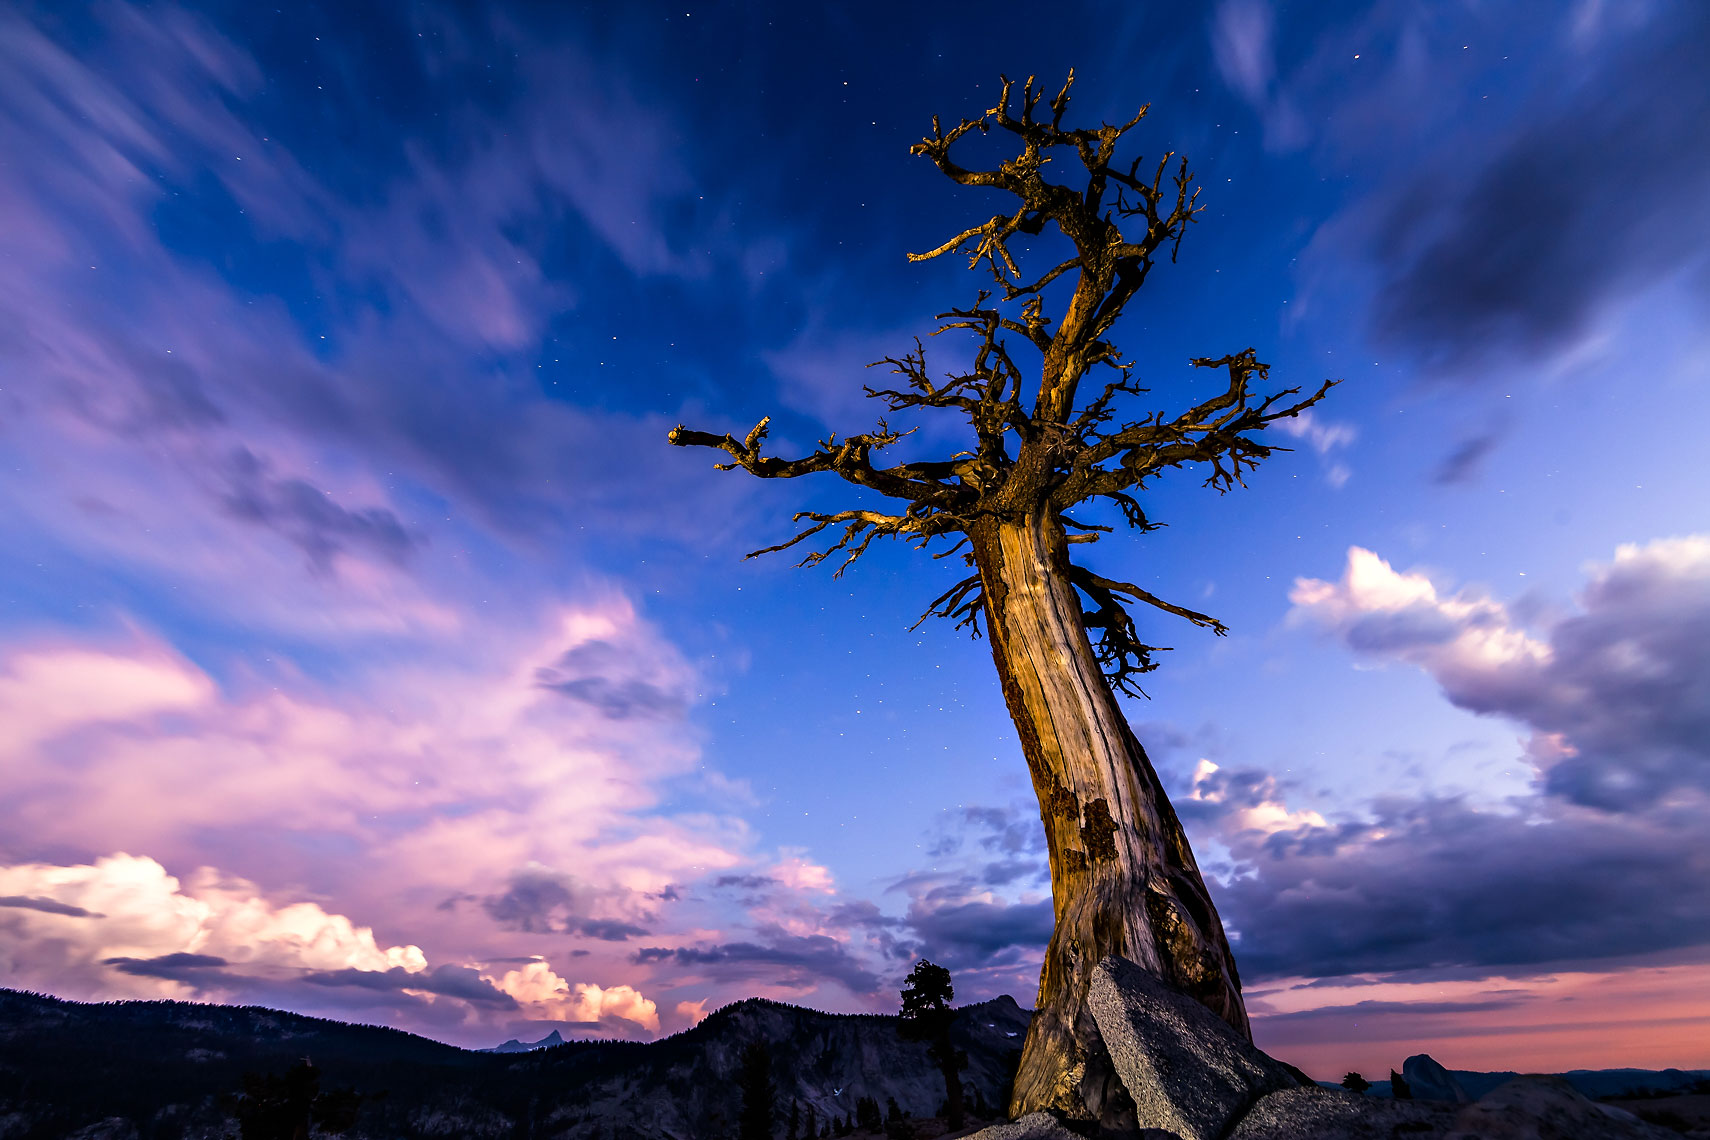 Celestial Olmsted Point Tree in Yosemite